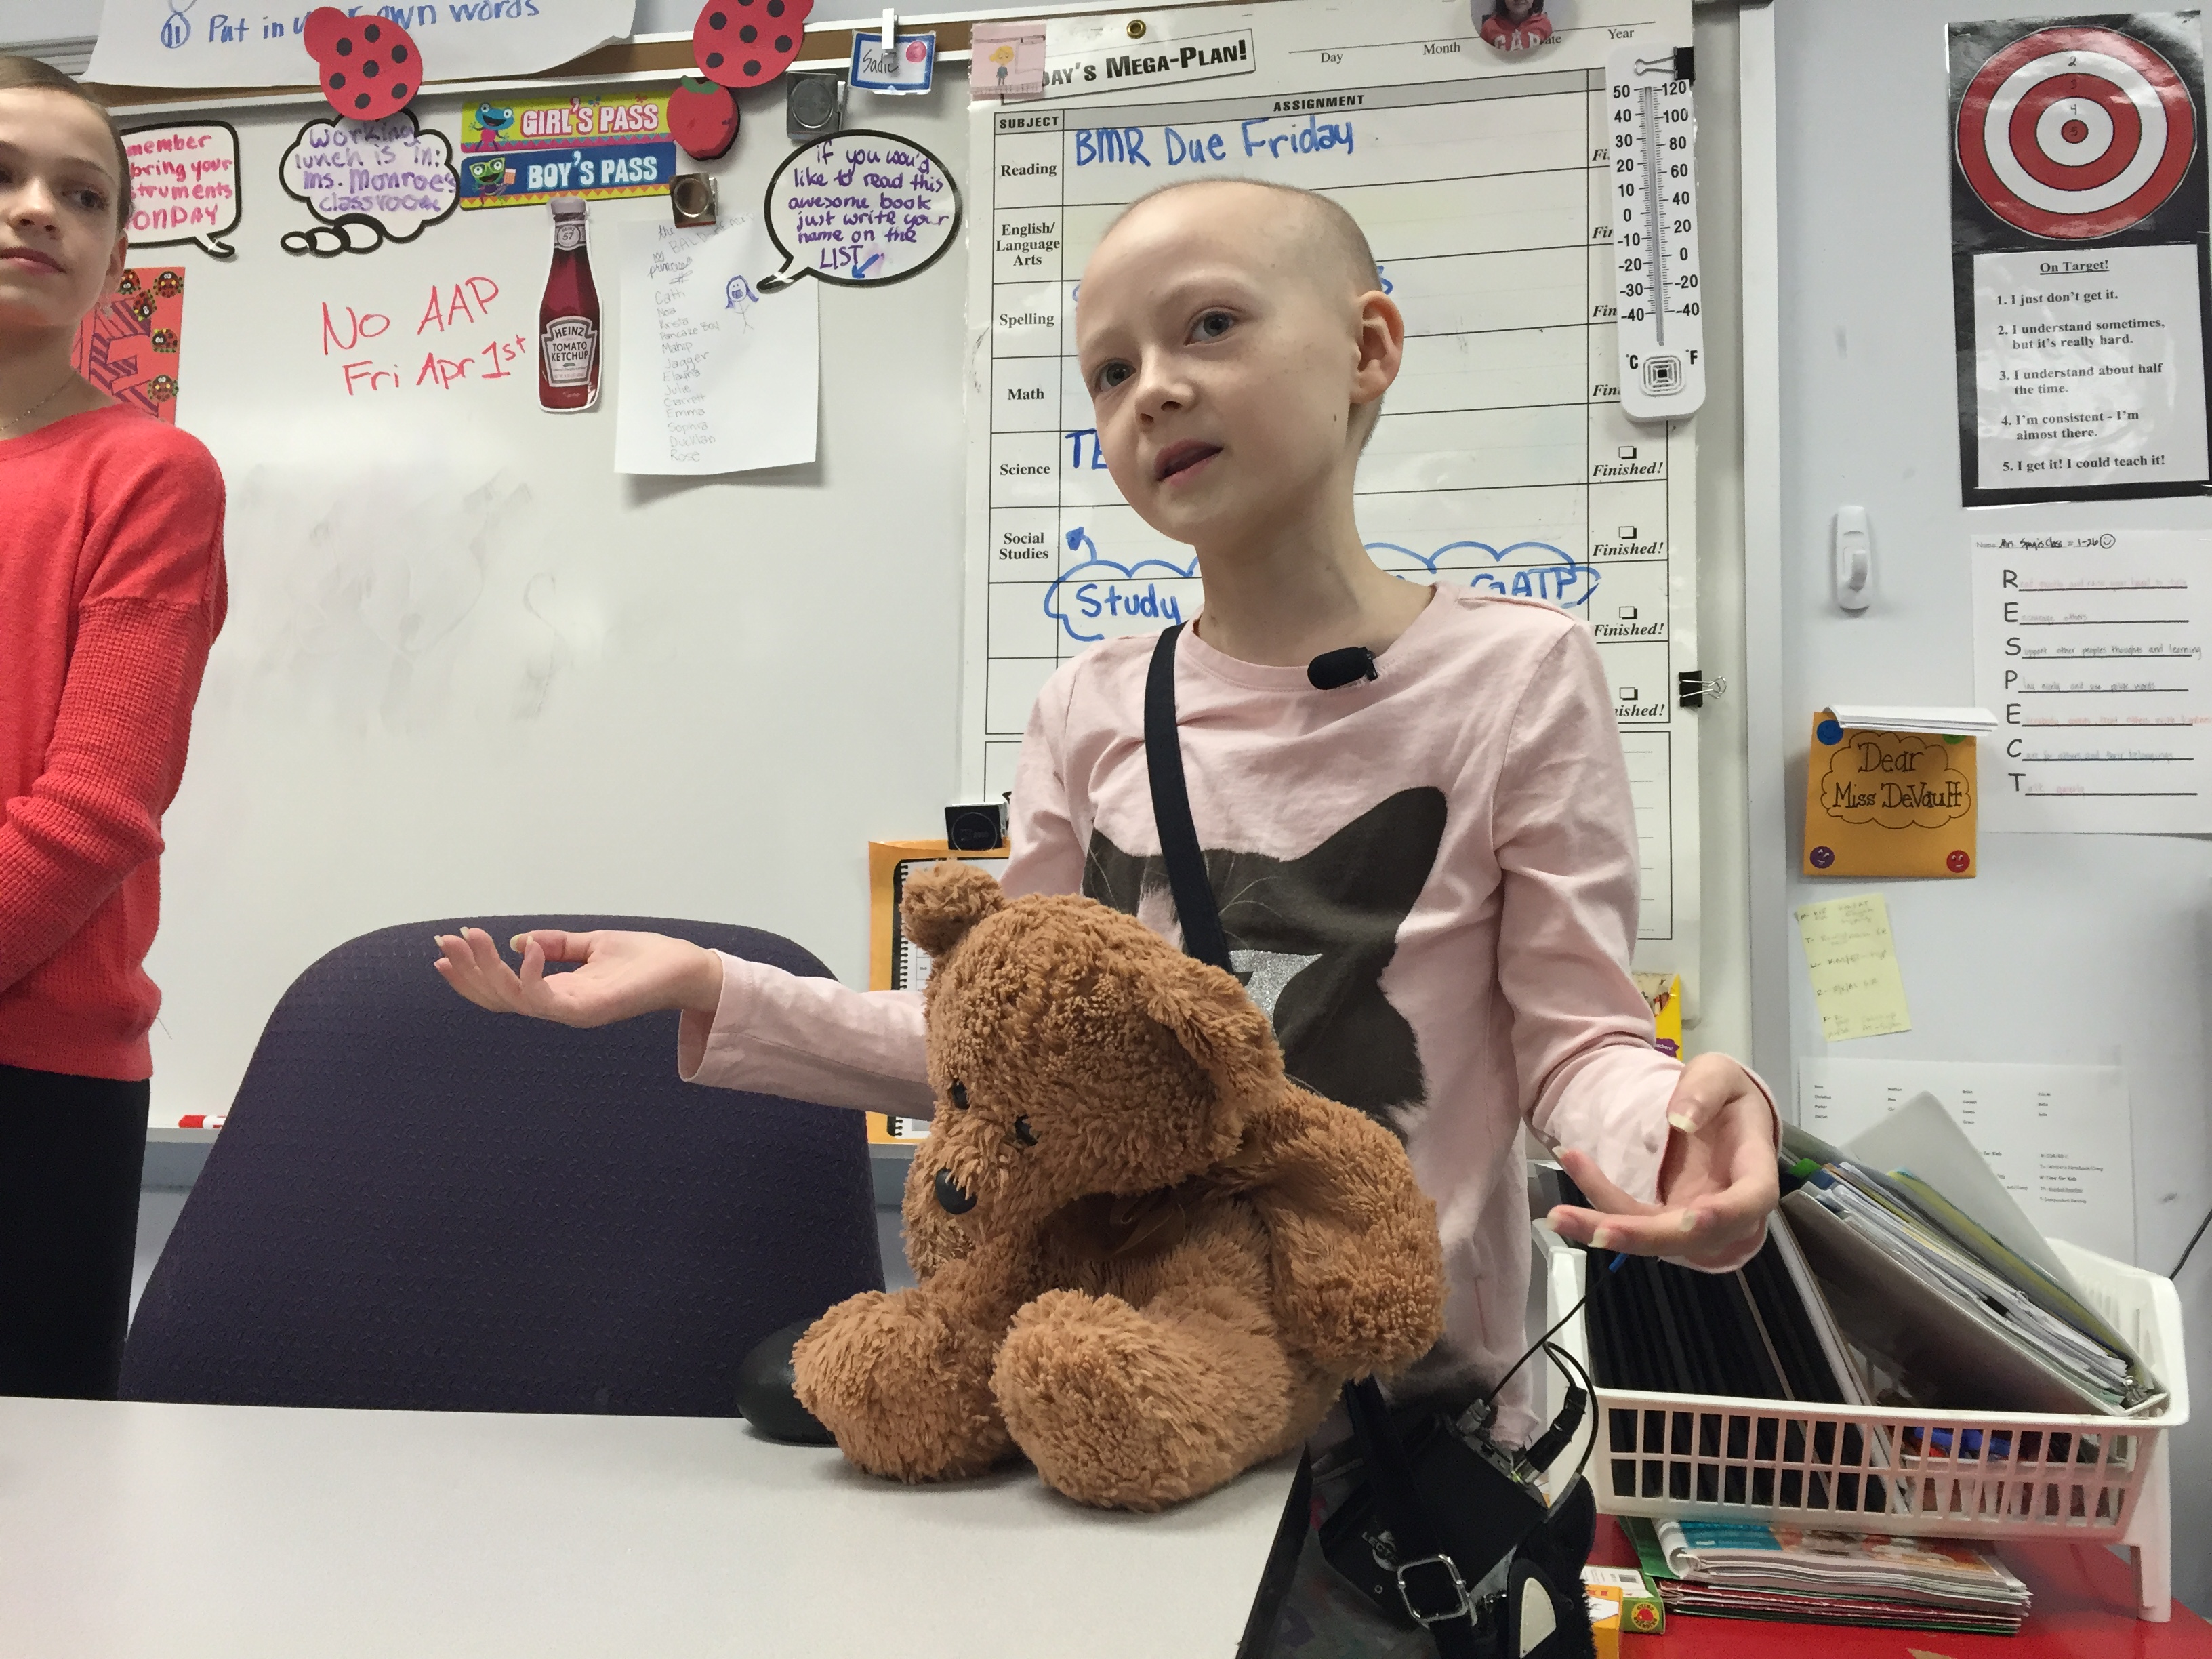 Local girl fighting cancer shares positive message with classmates